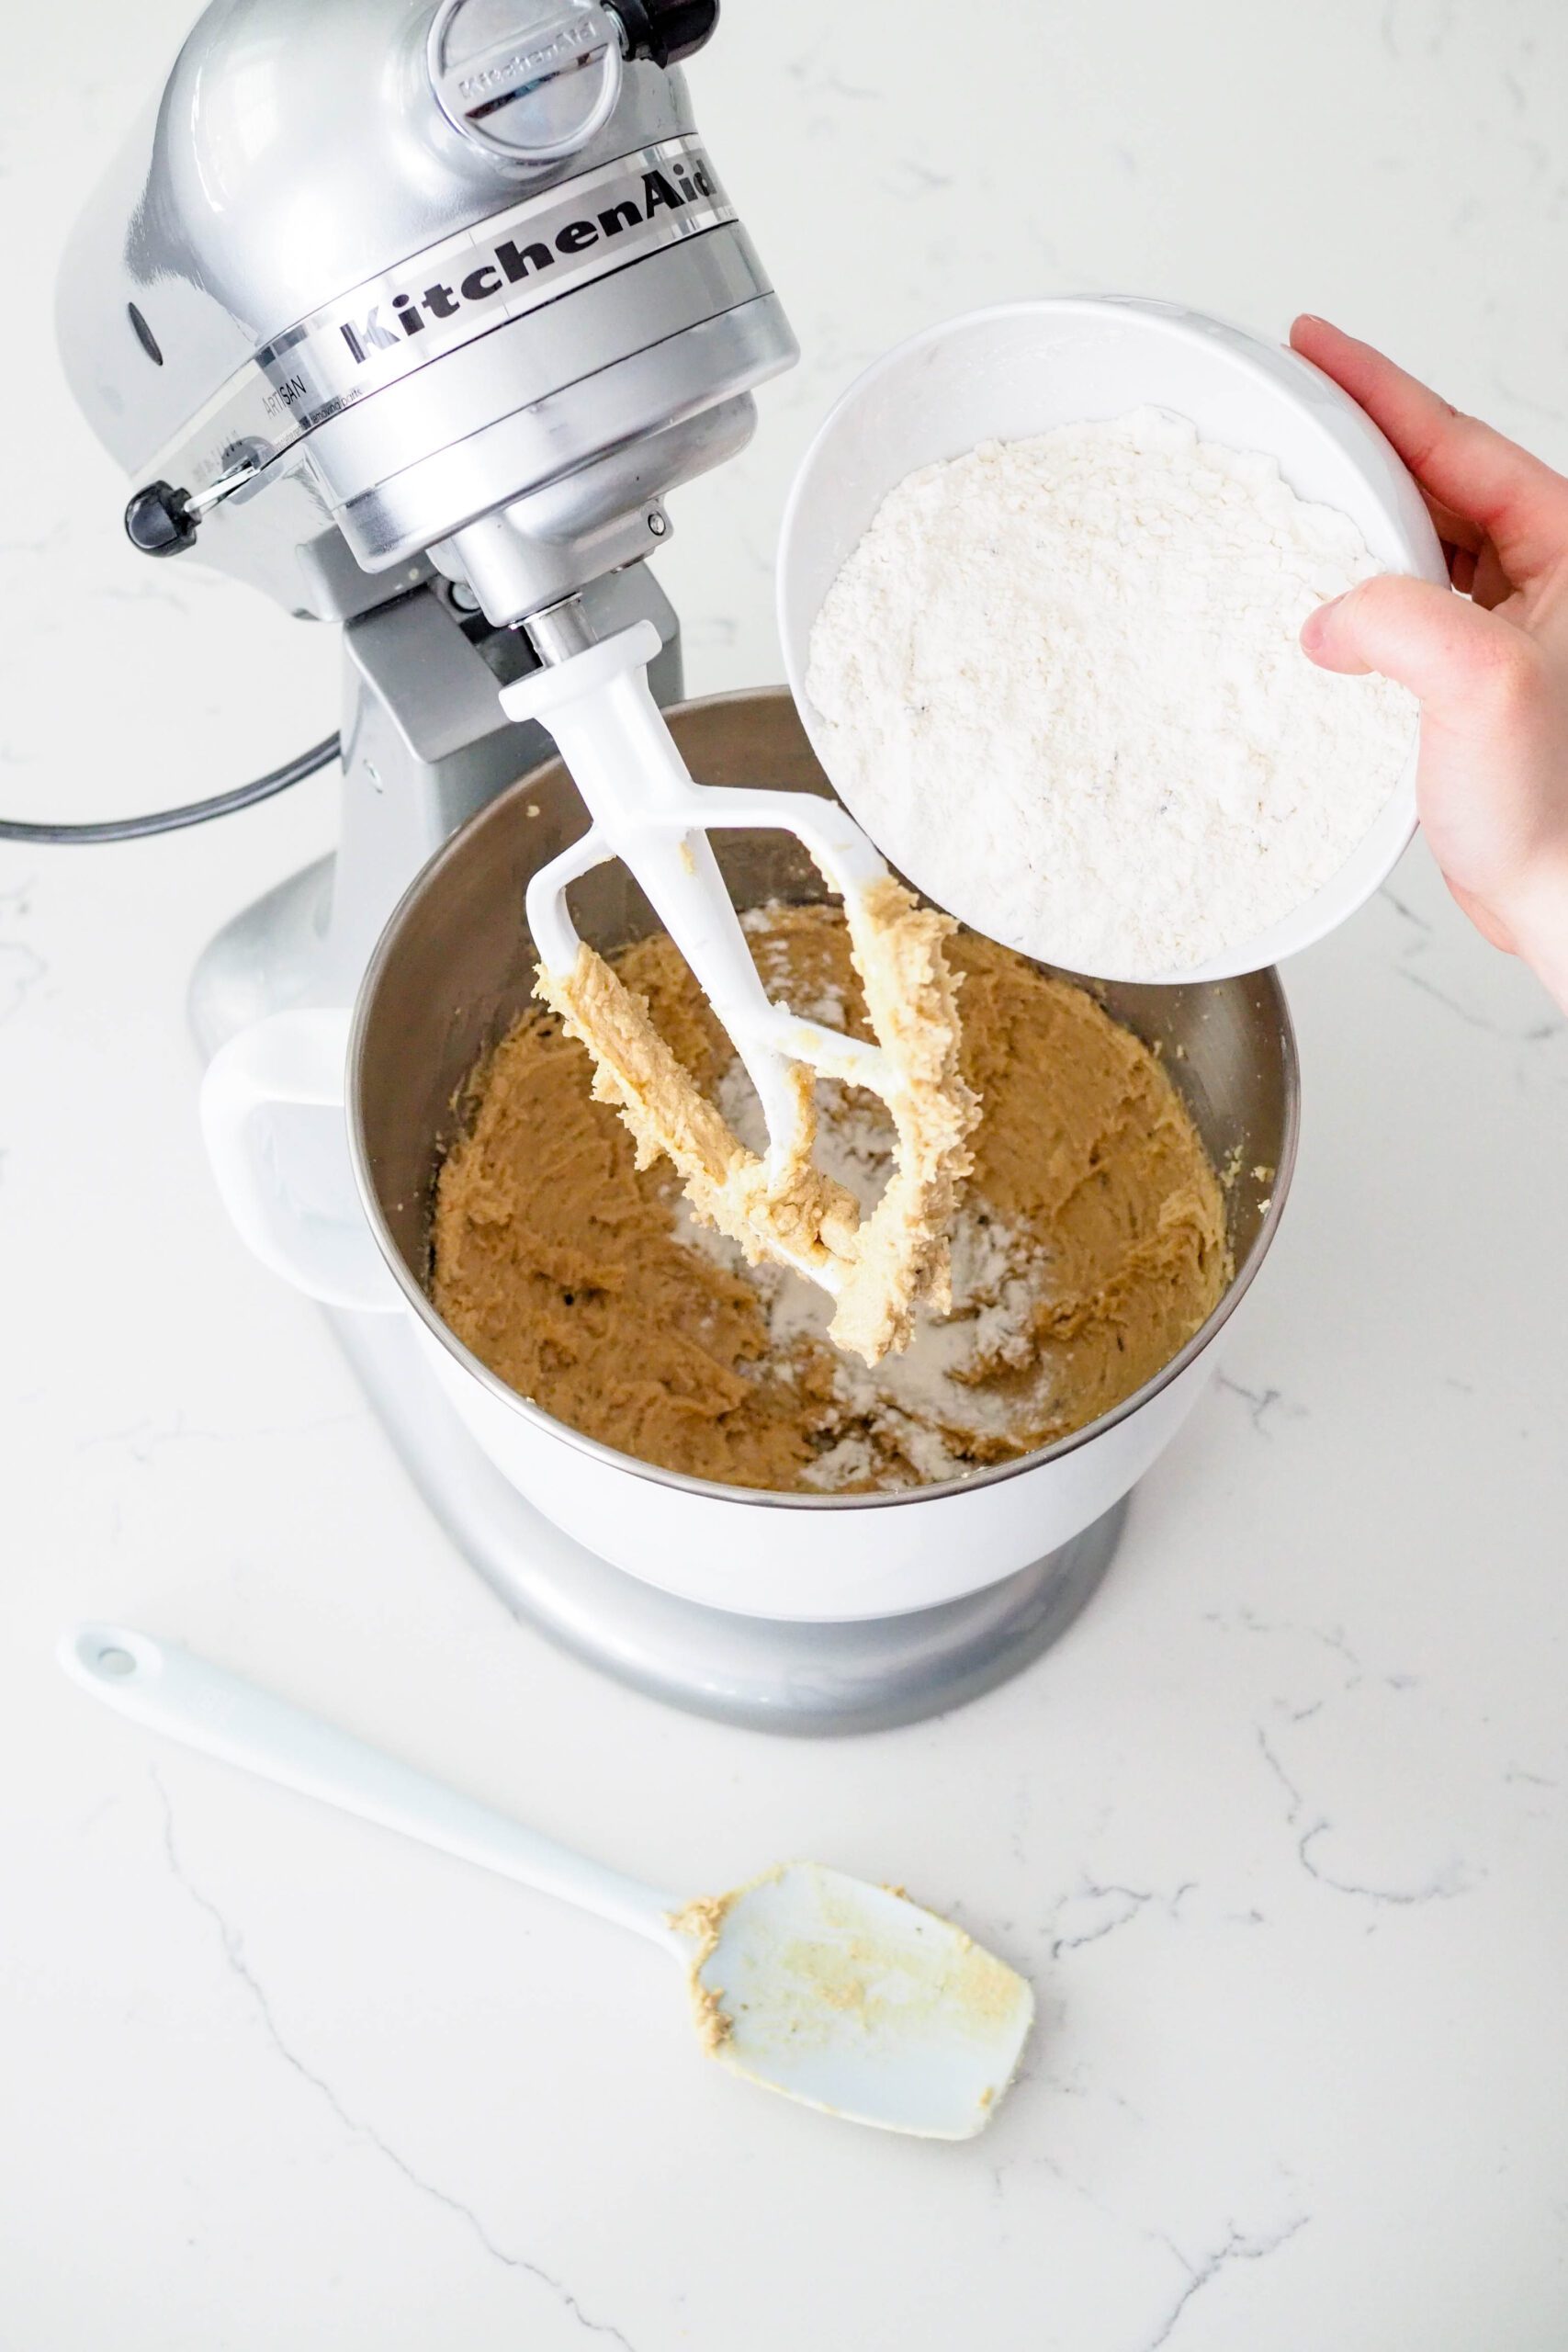 A bowl of flour and lavender buds is dumped into the bowl of a stand mixer.